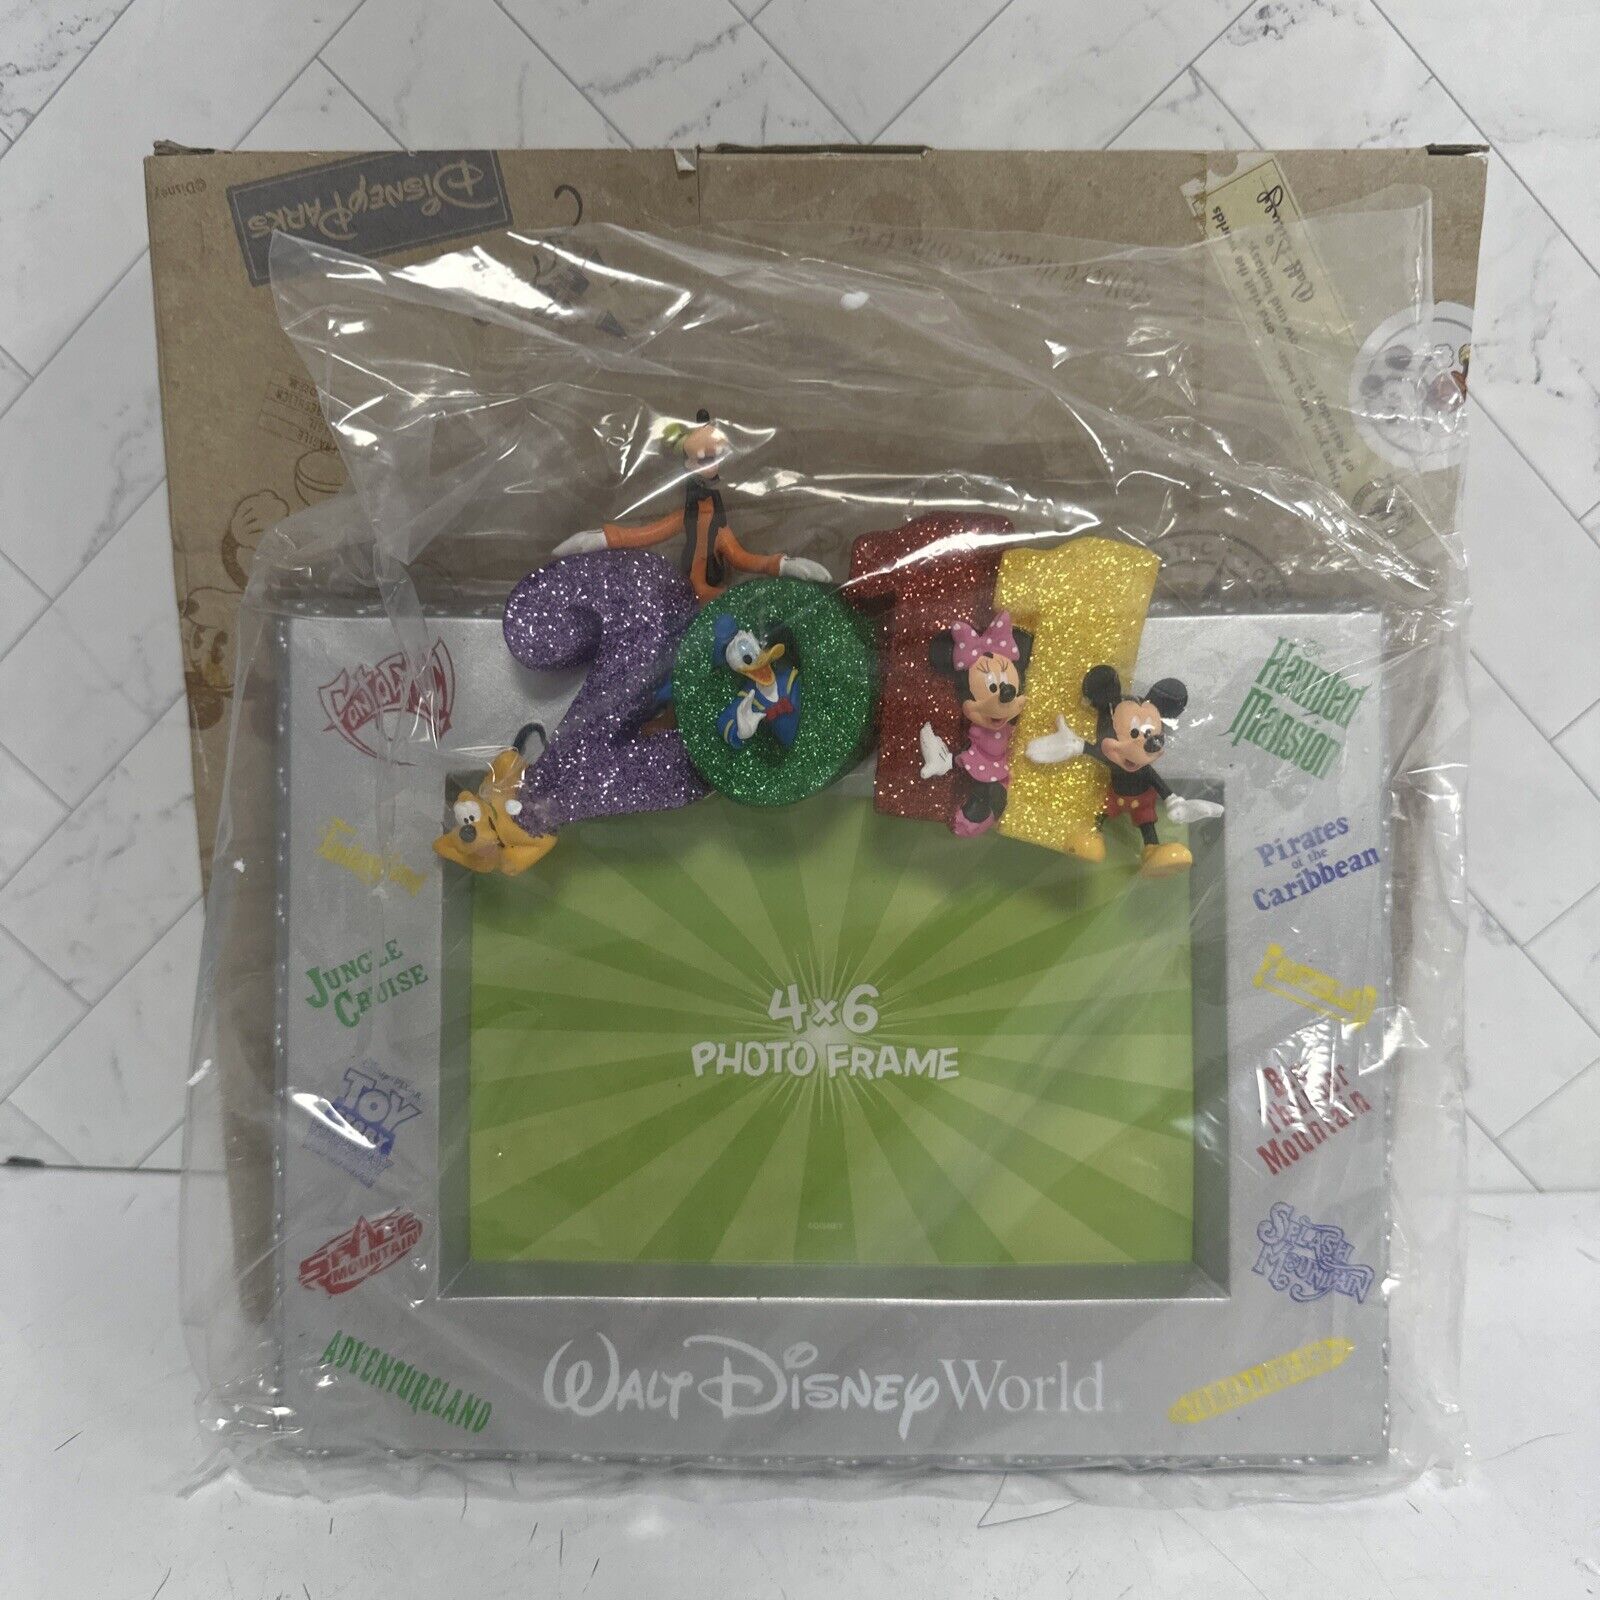 Authentic DISNEY Parks 2011 Character Attraction Picture Frame New In Box